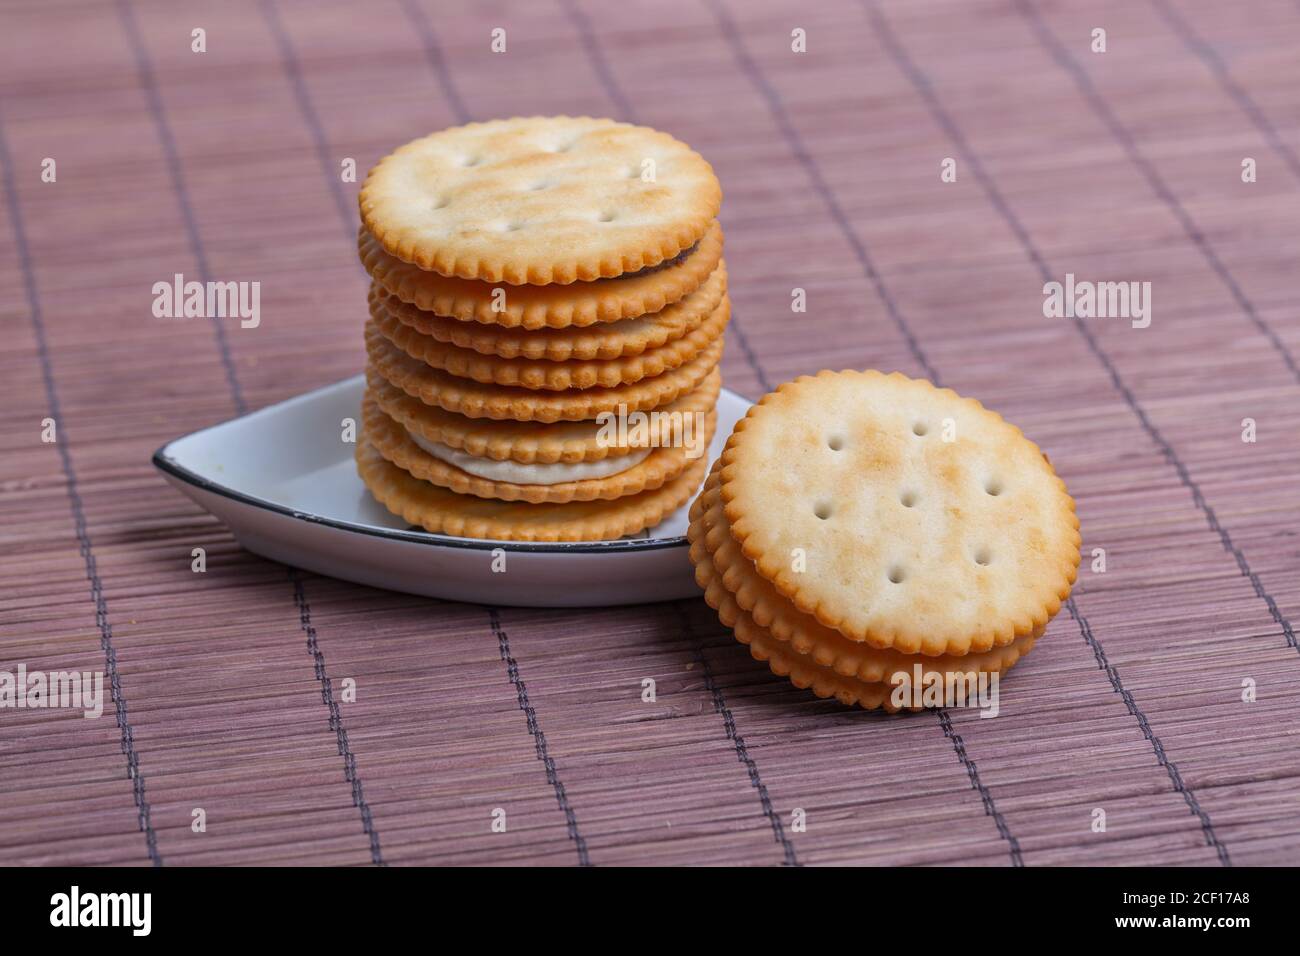 Cream sandwich biscuits on bamboo curtain background Stock Photo